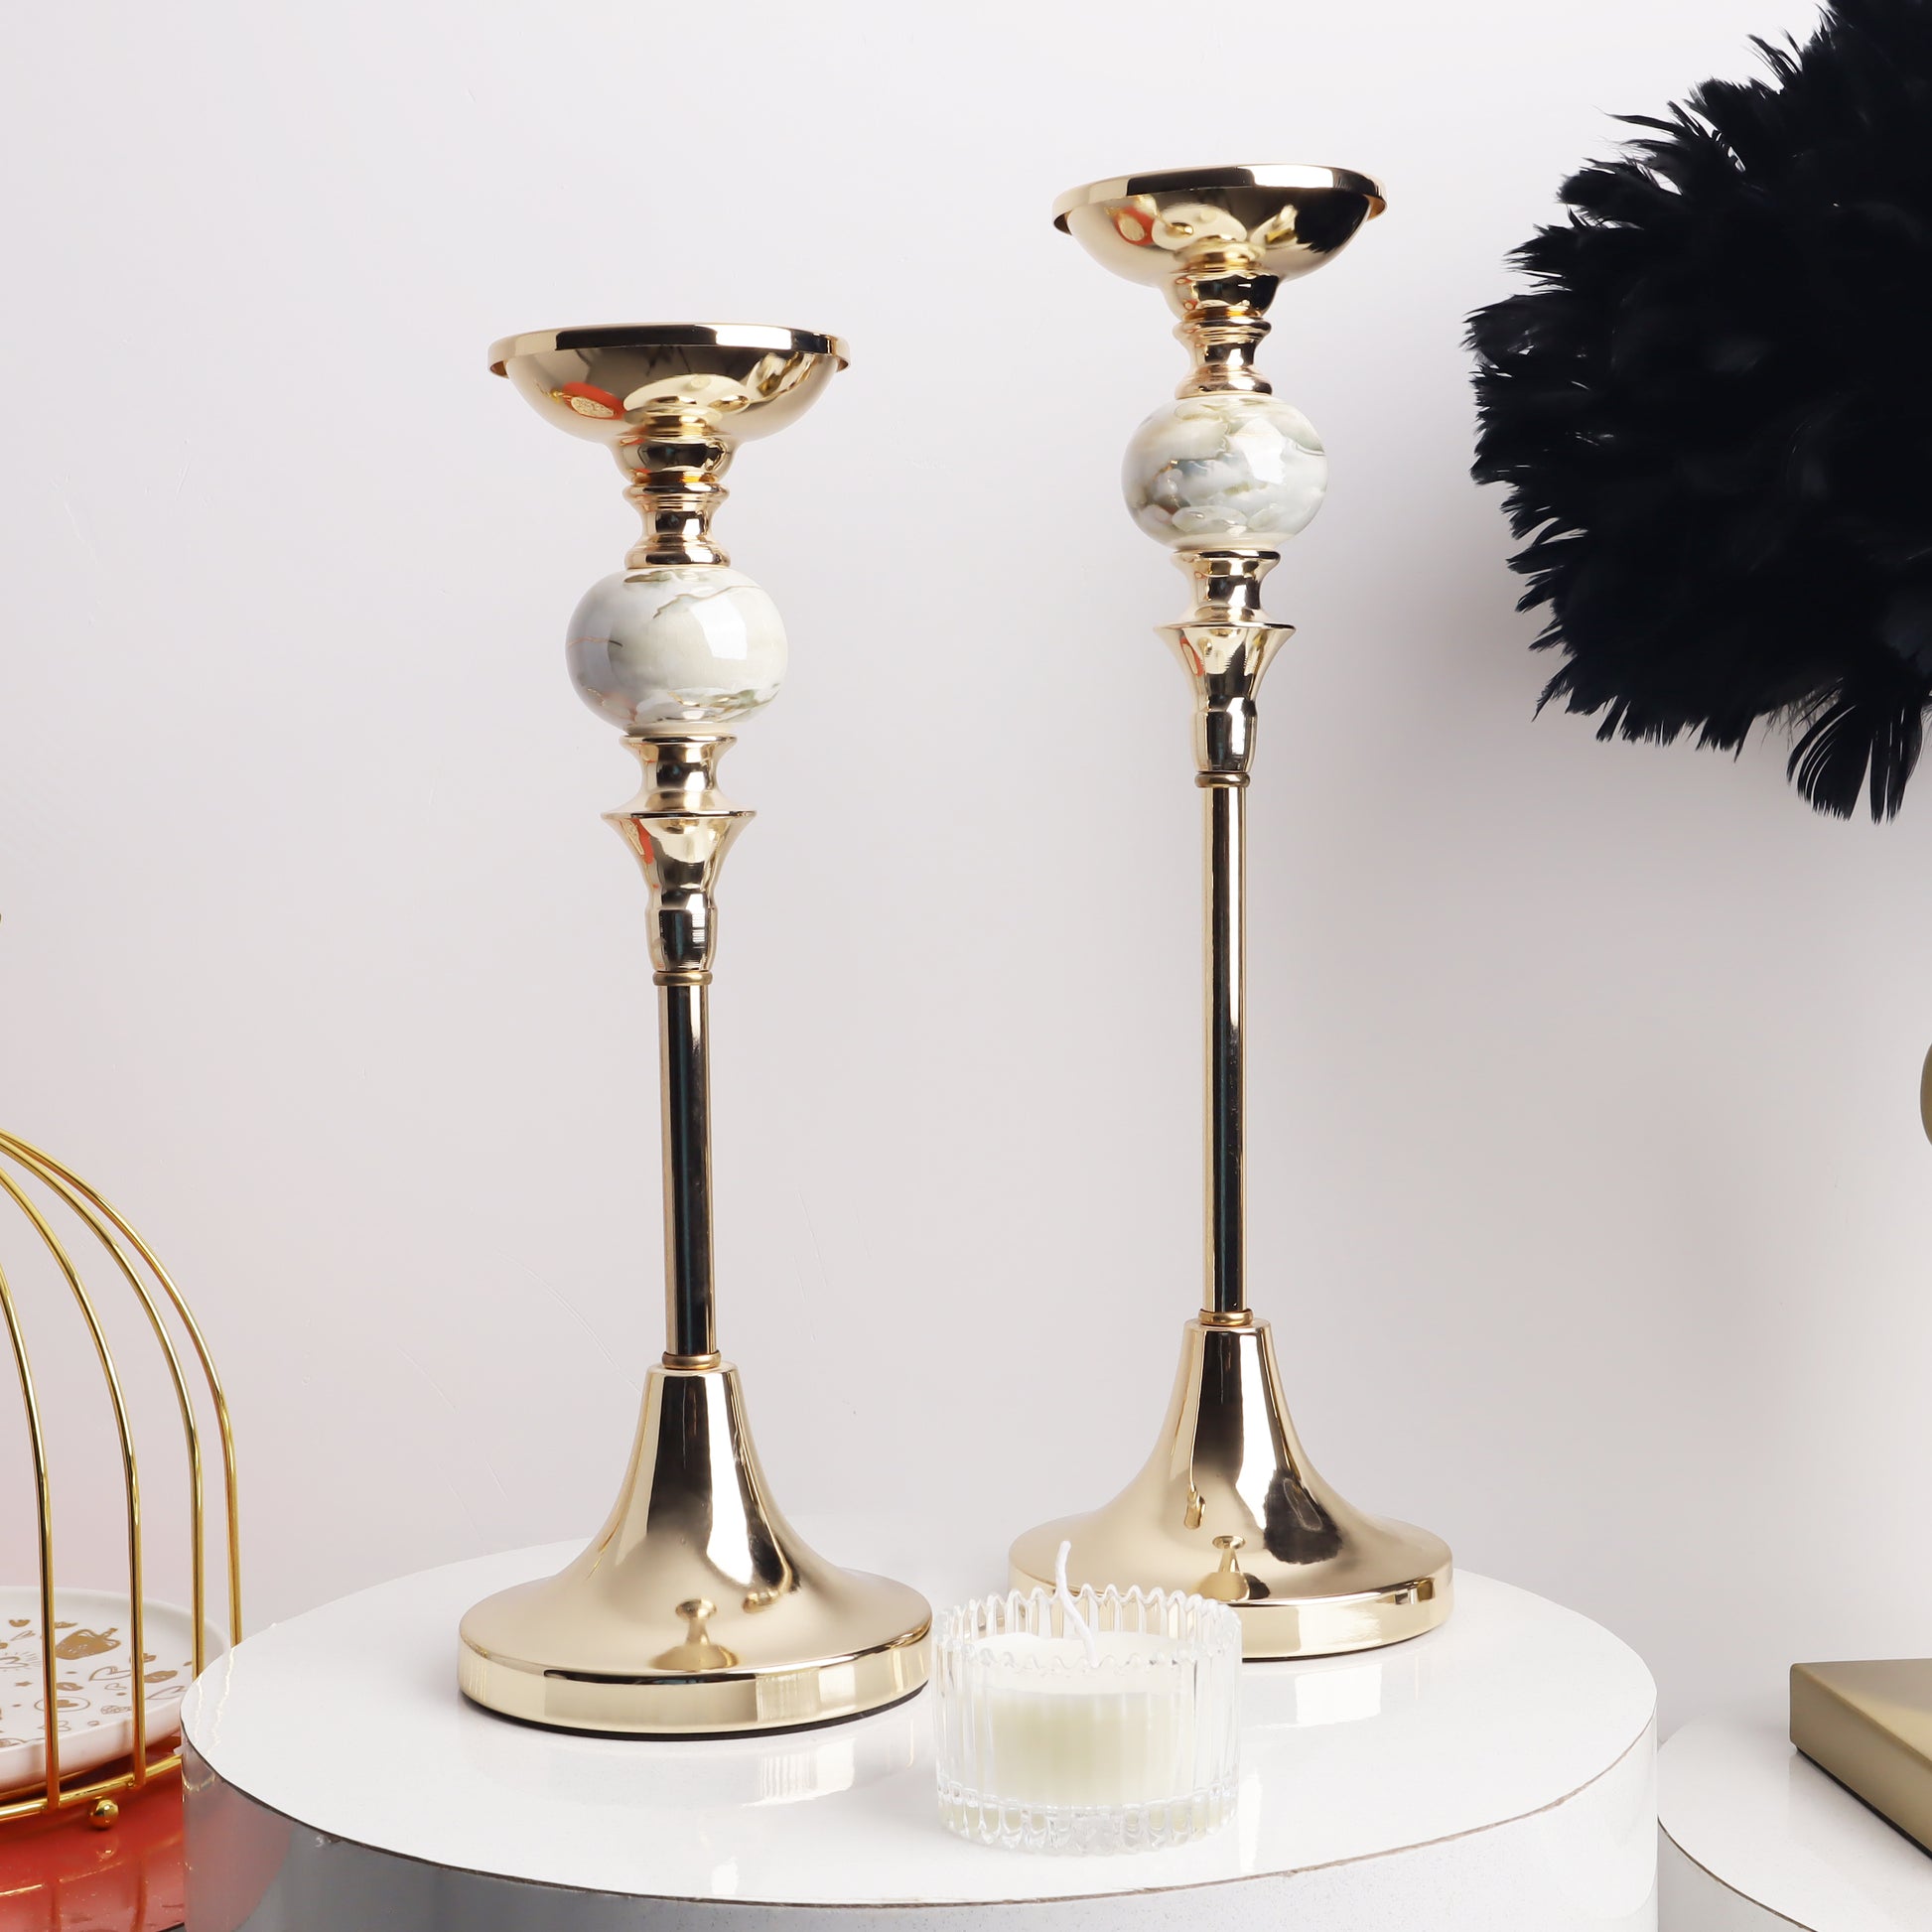 Swasha's elegant candle stand - perfect for ambient lighting and decor accents